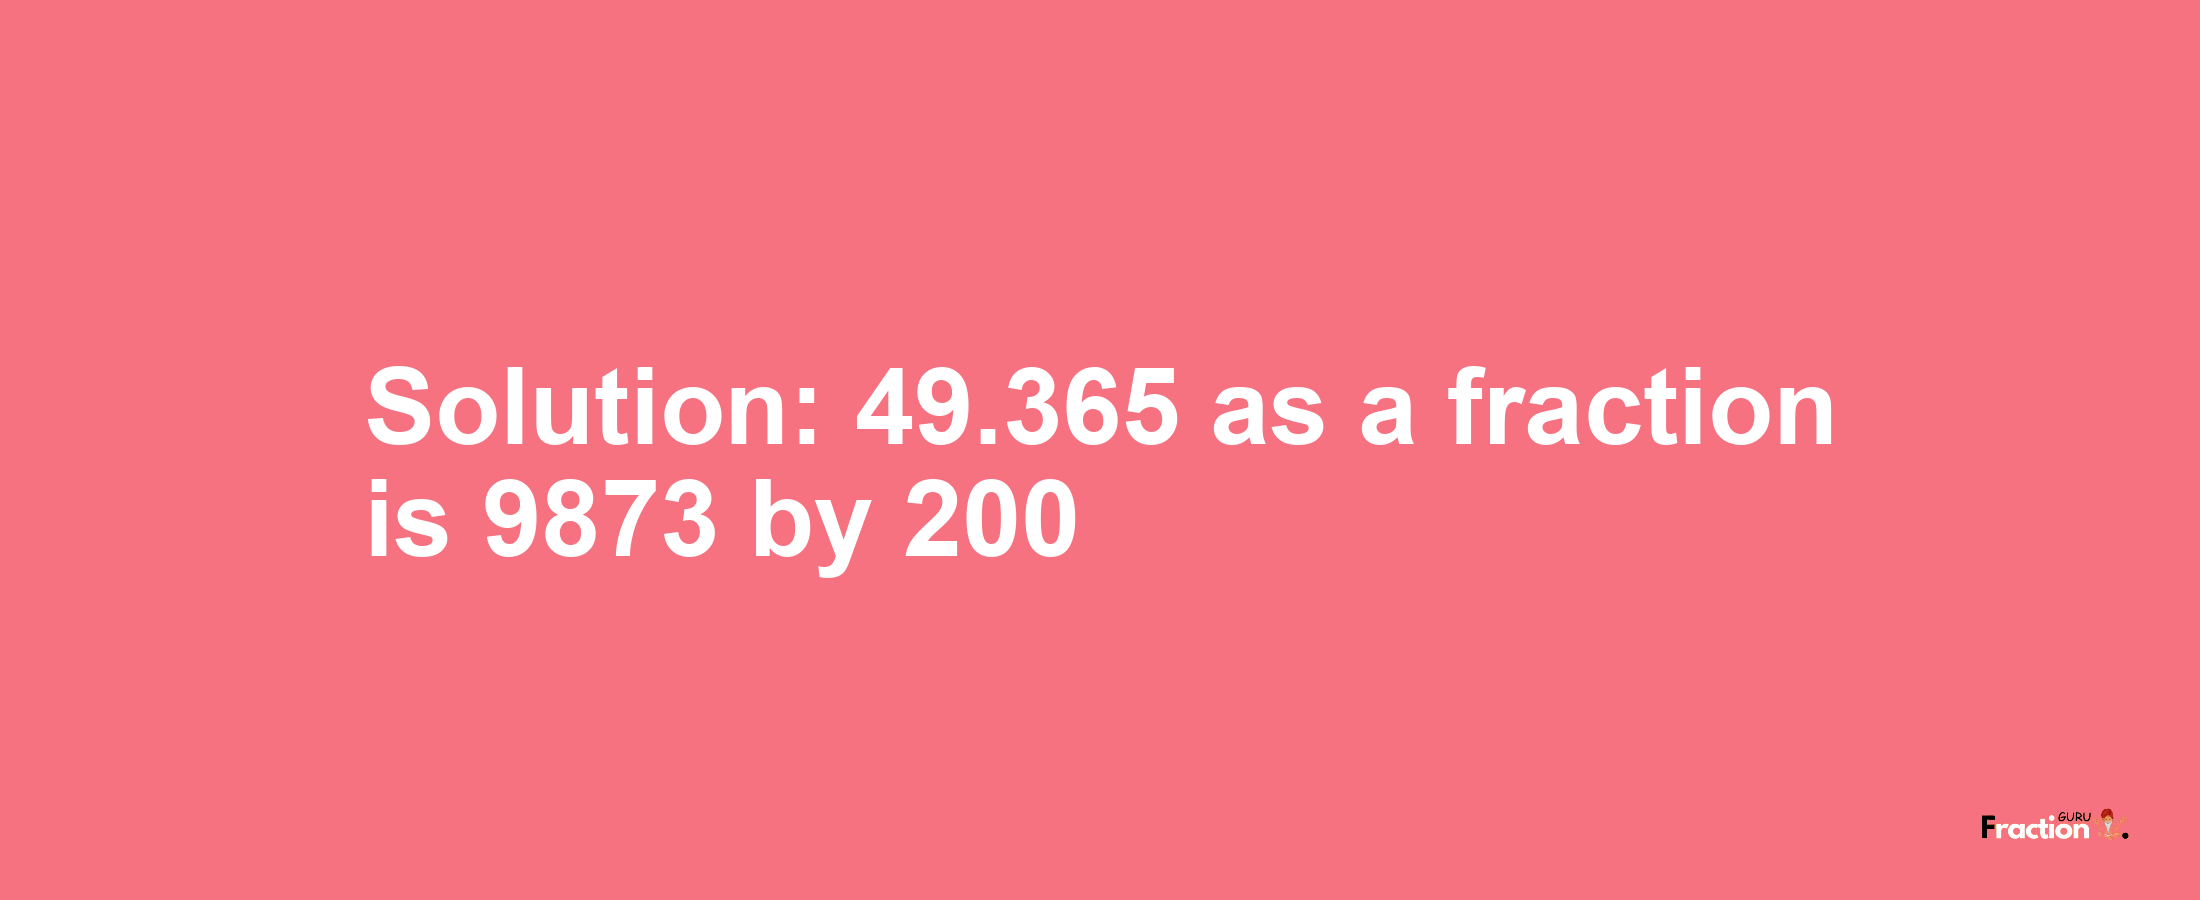 Solution:49.365 as a fraction is 9873/200